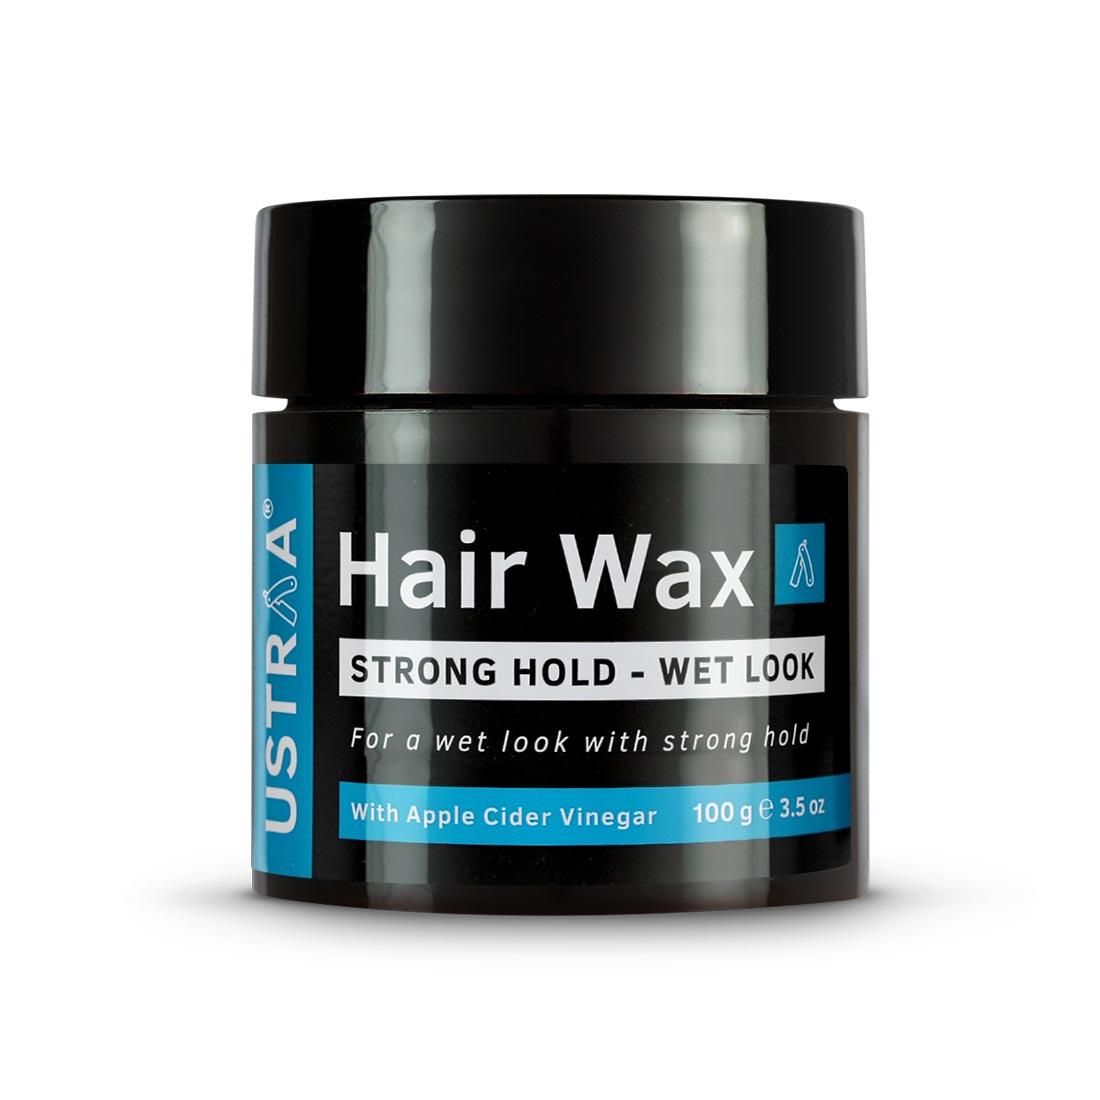 Ustraa Strong Hold Hair Wax - Wet Look - Non-sticky Hair Styling Wax, Wet finish, Easy-to-Wash, Strong Hold, Free of Harmful Chemicals, 100g